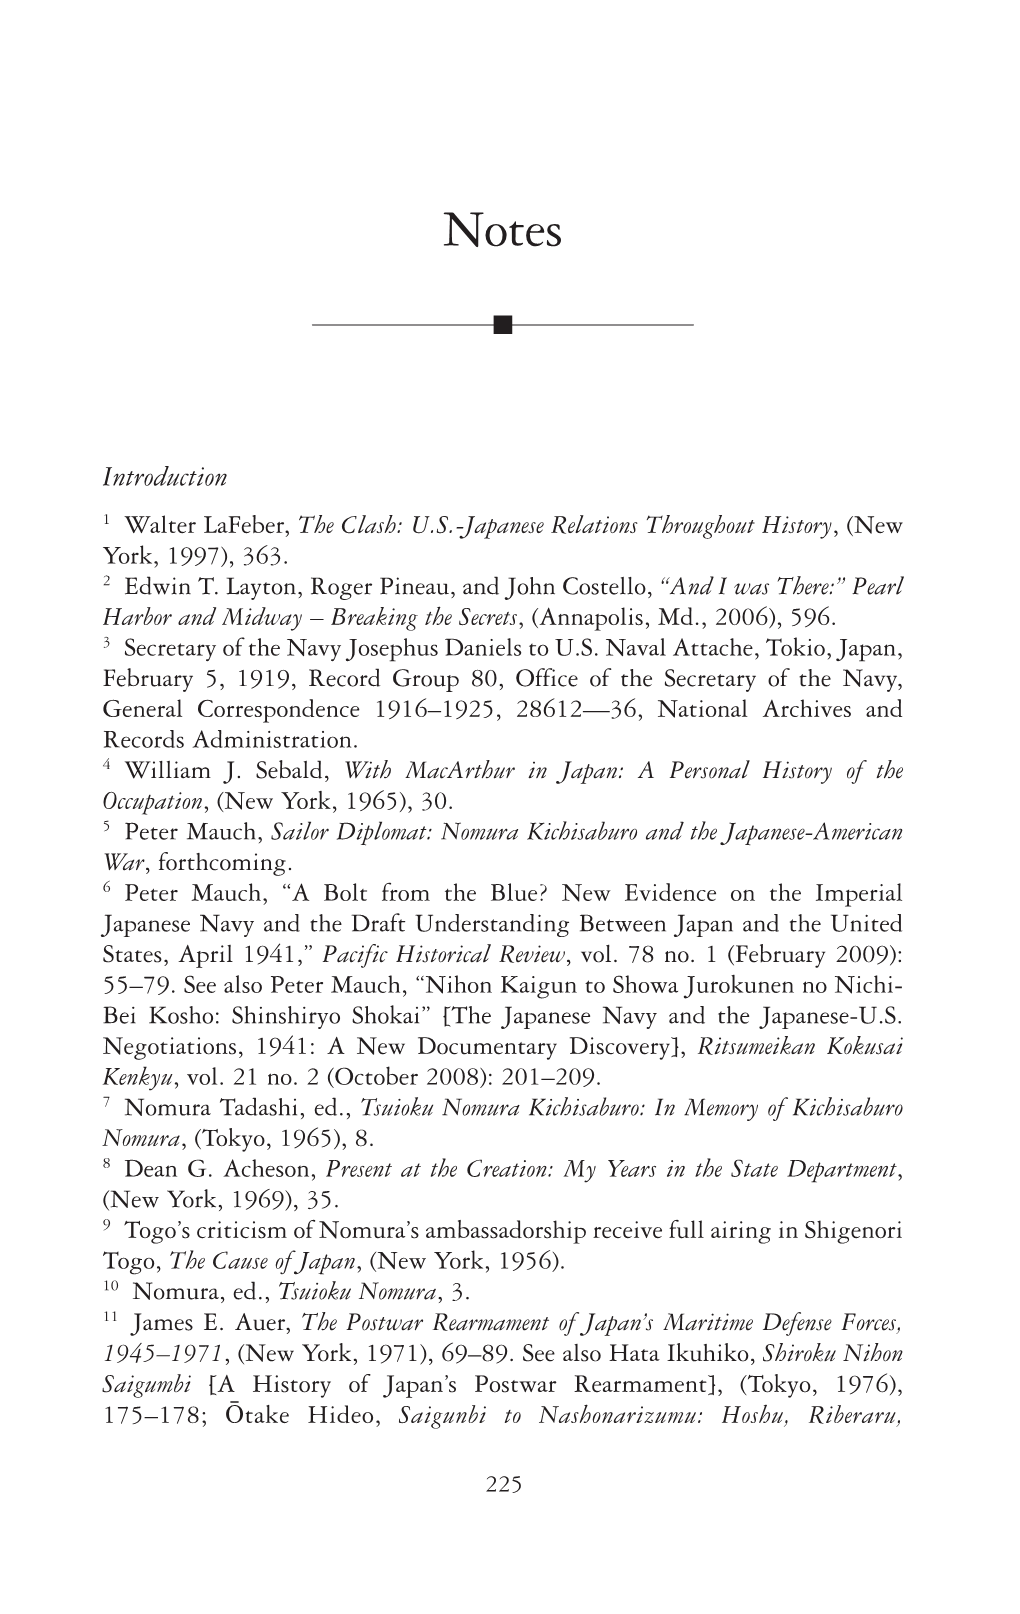 Introduction 1 Walter Lafeber, the Clash: U.S.-Japanese Relations Throughout History, (New York, 1997), 363